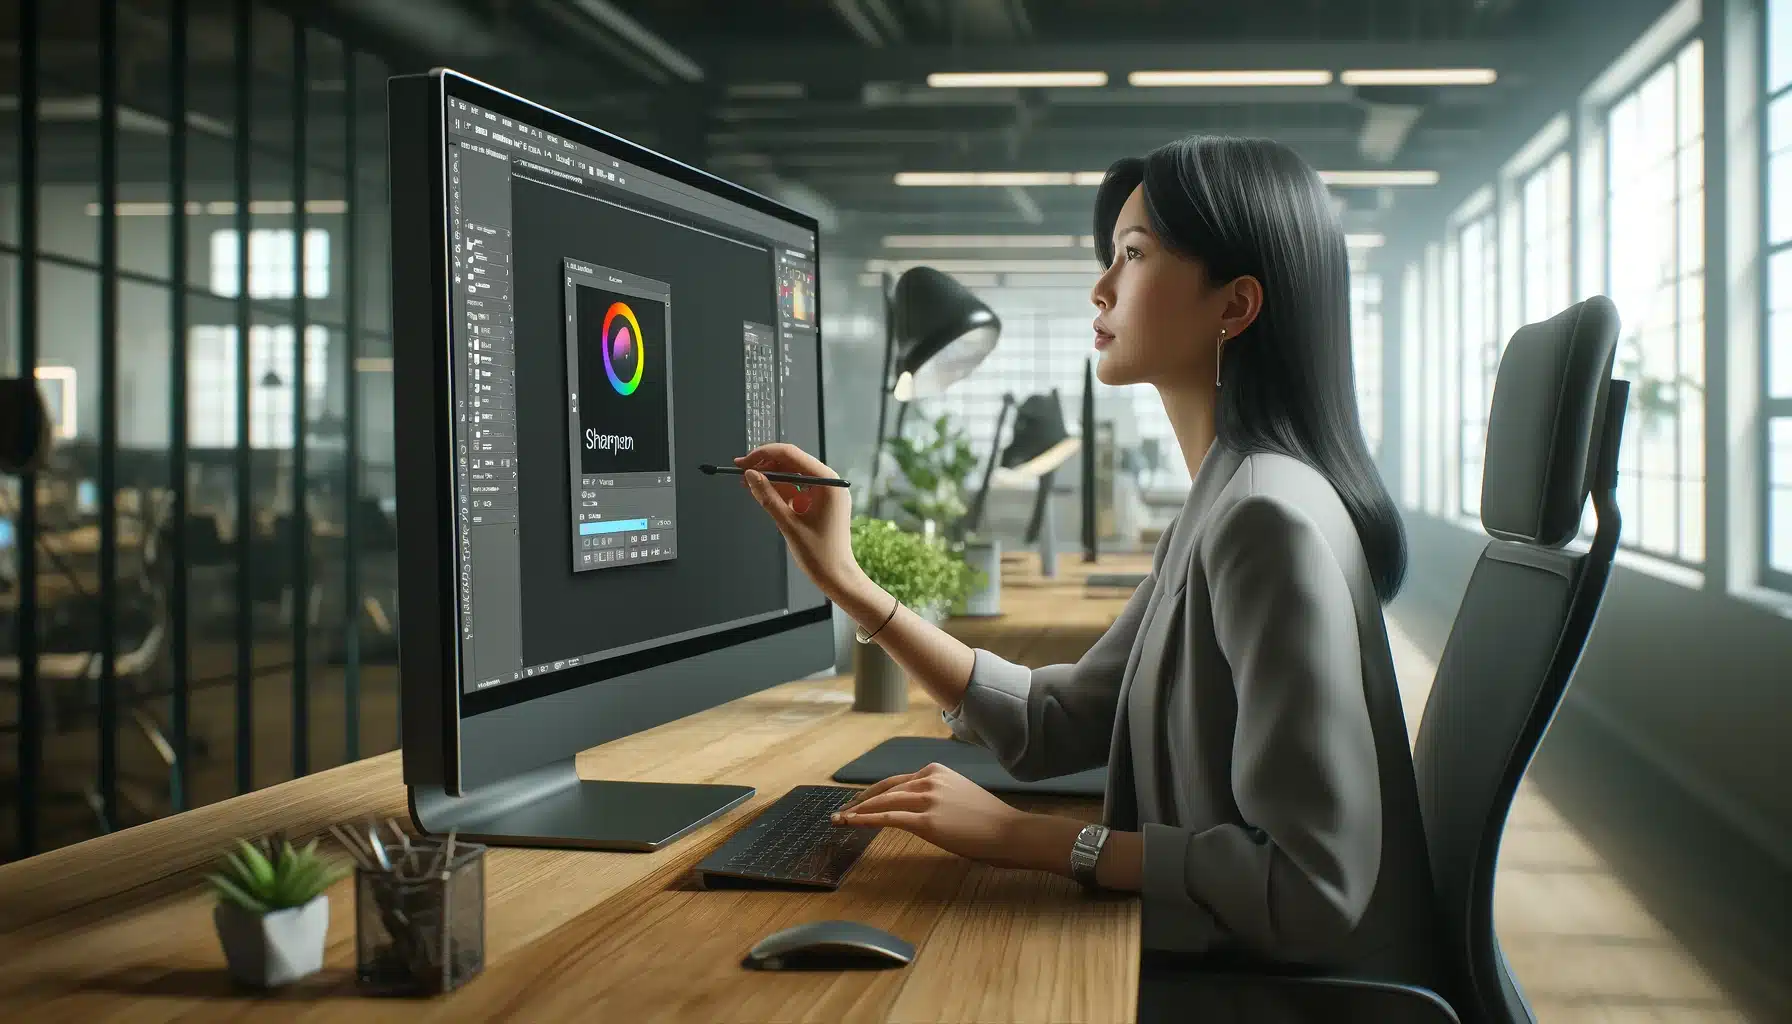 A young Asian female professional sharpening an image in Photoshop in a modern, well-lit office environment, focusing on the computer screen displaying the Photoshop 'Sharpen' tool.